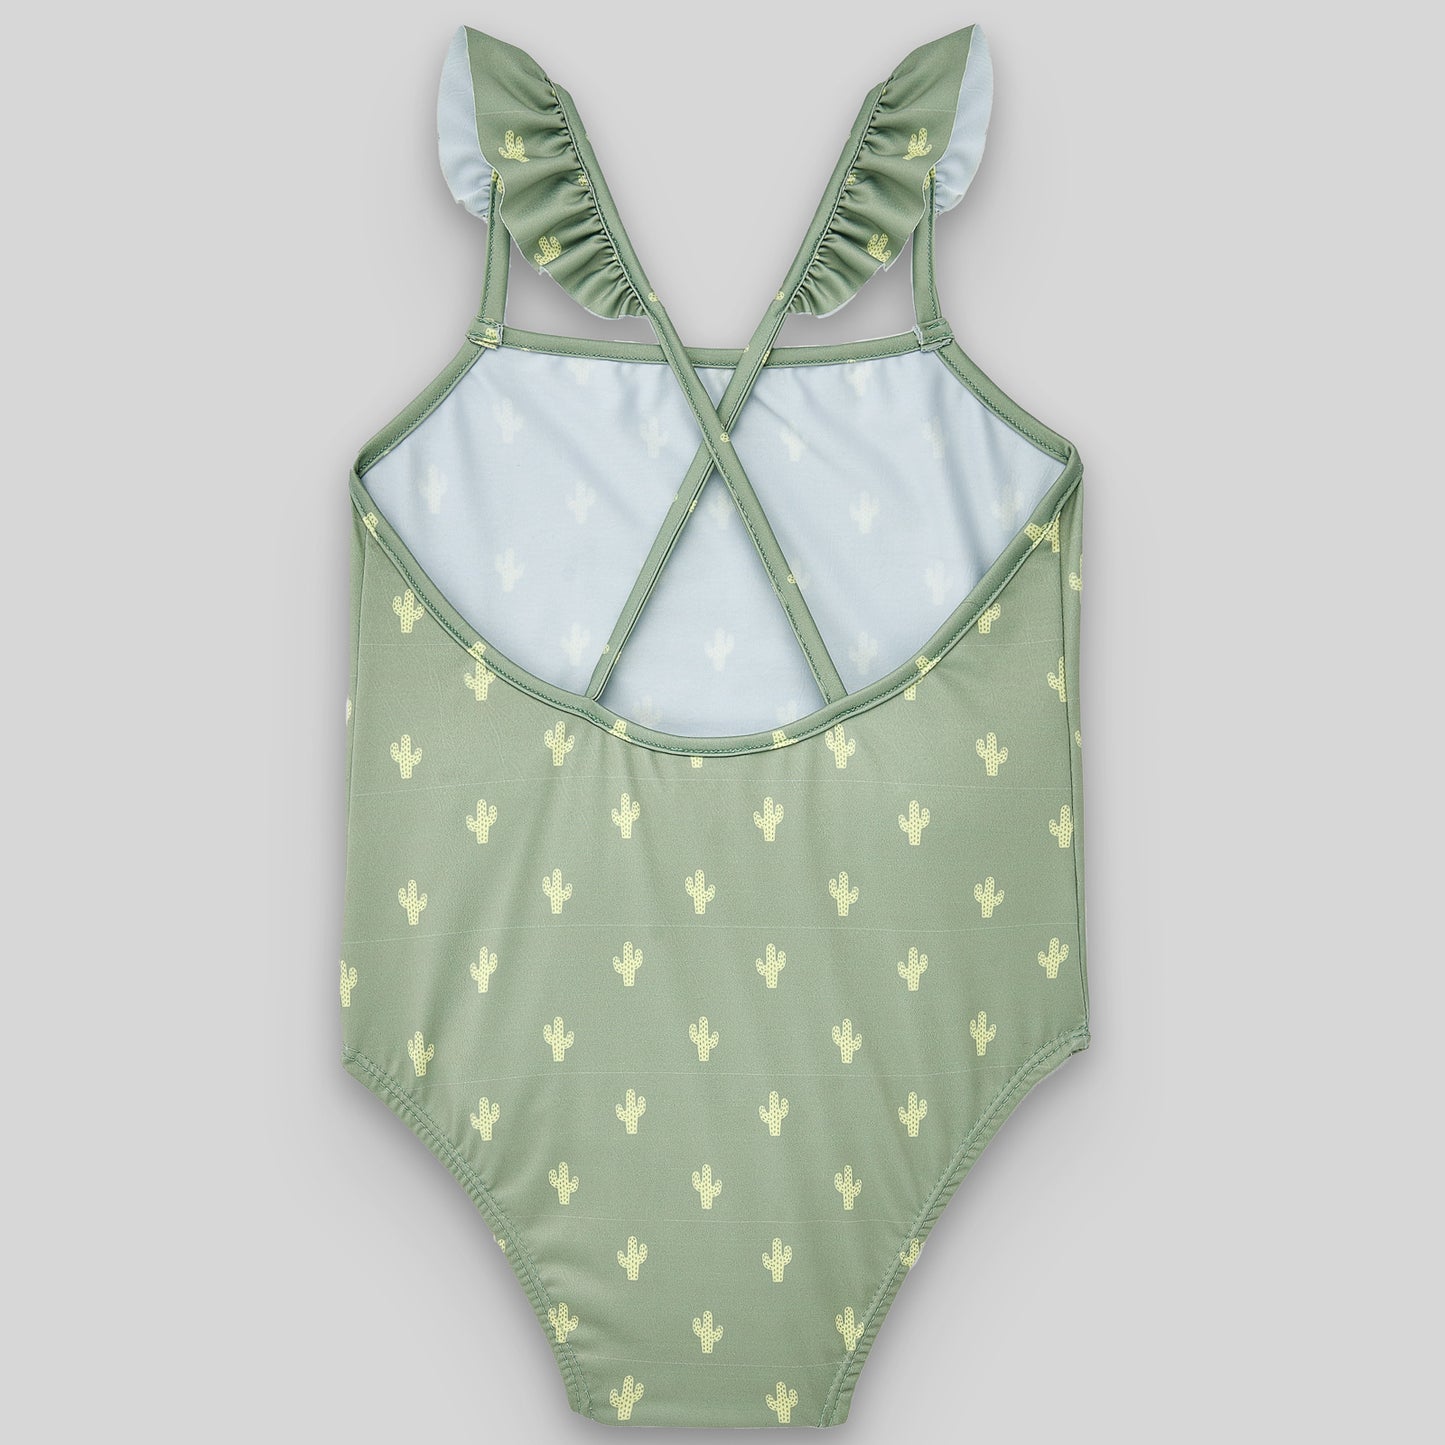 PAZ RODRIGUEZ Green-Yellow Cactus Pattern One-piece Swimsuit